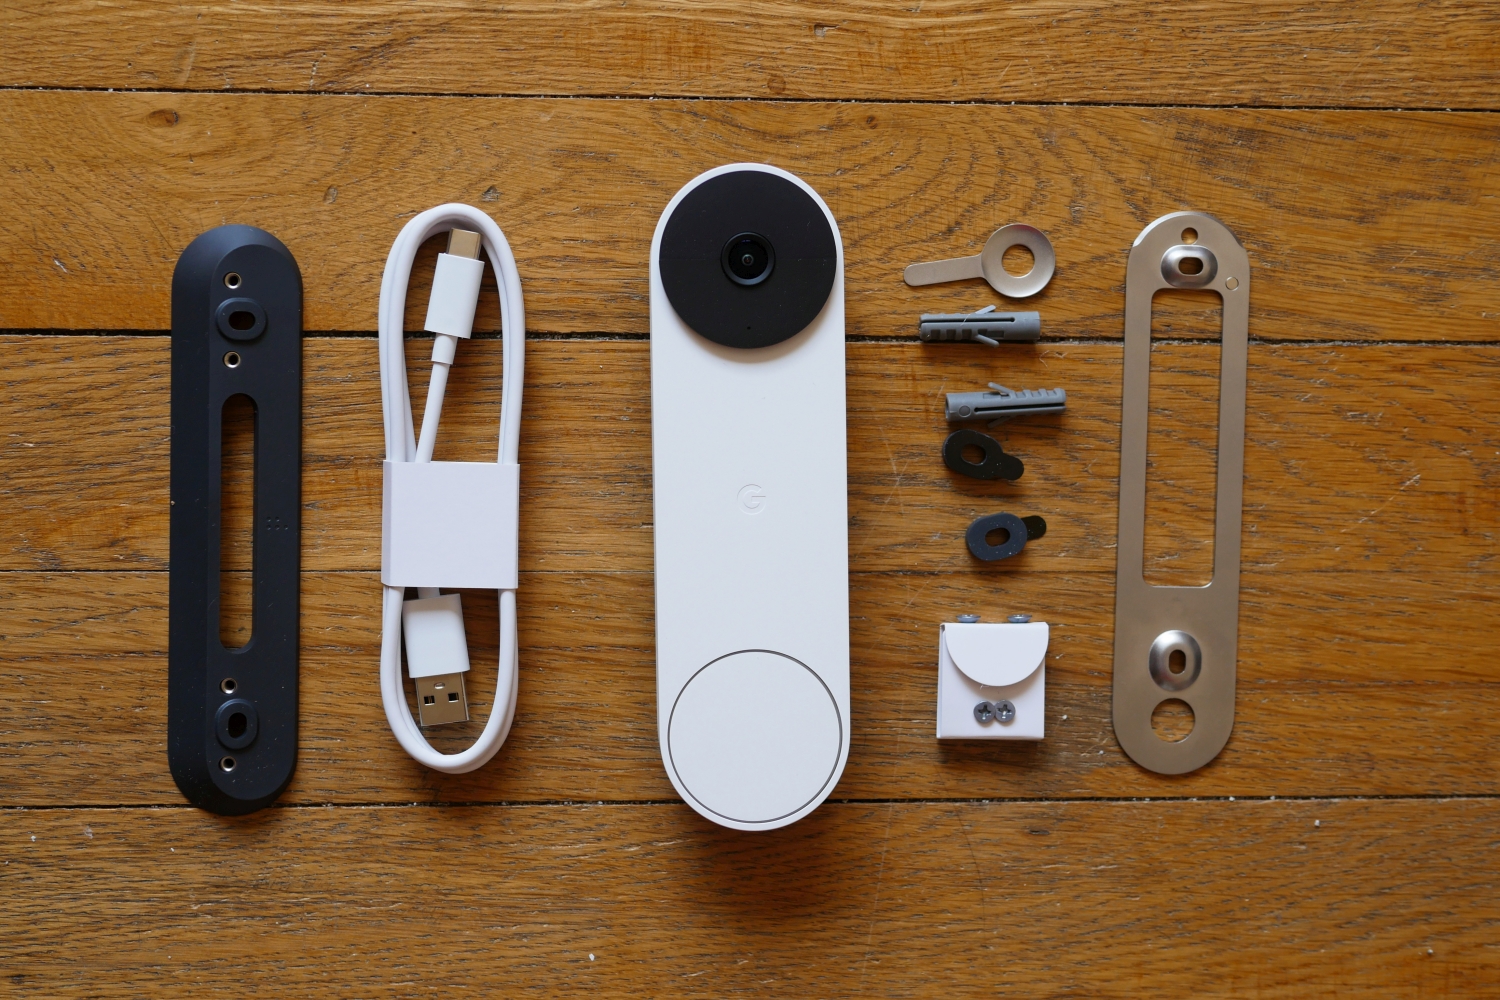 How Long Does The Nest Doorbell Battery Last | CellularNews